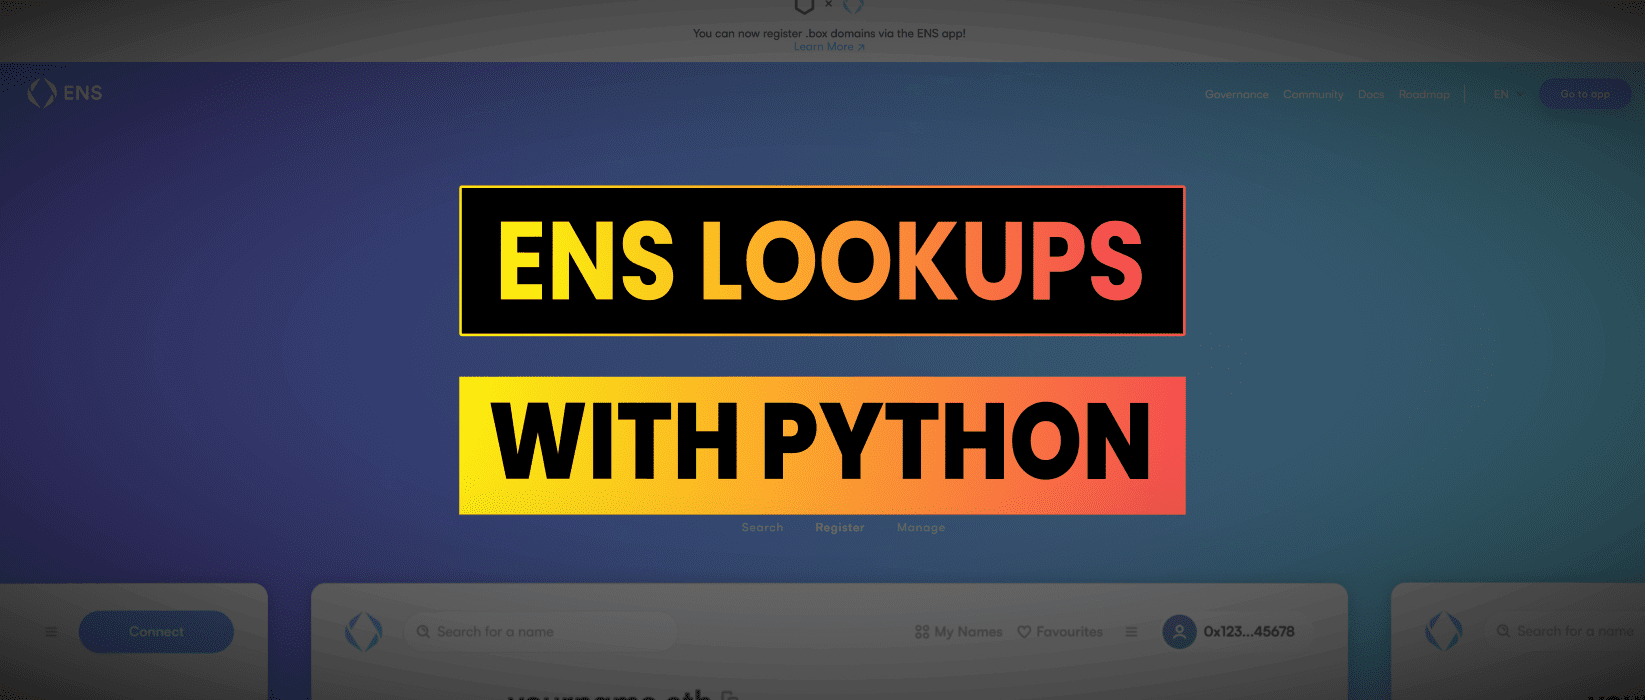 How To Lookup An ENS Name In Python